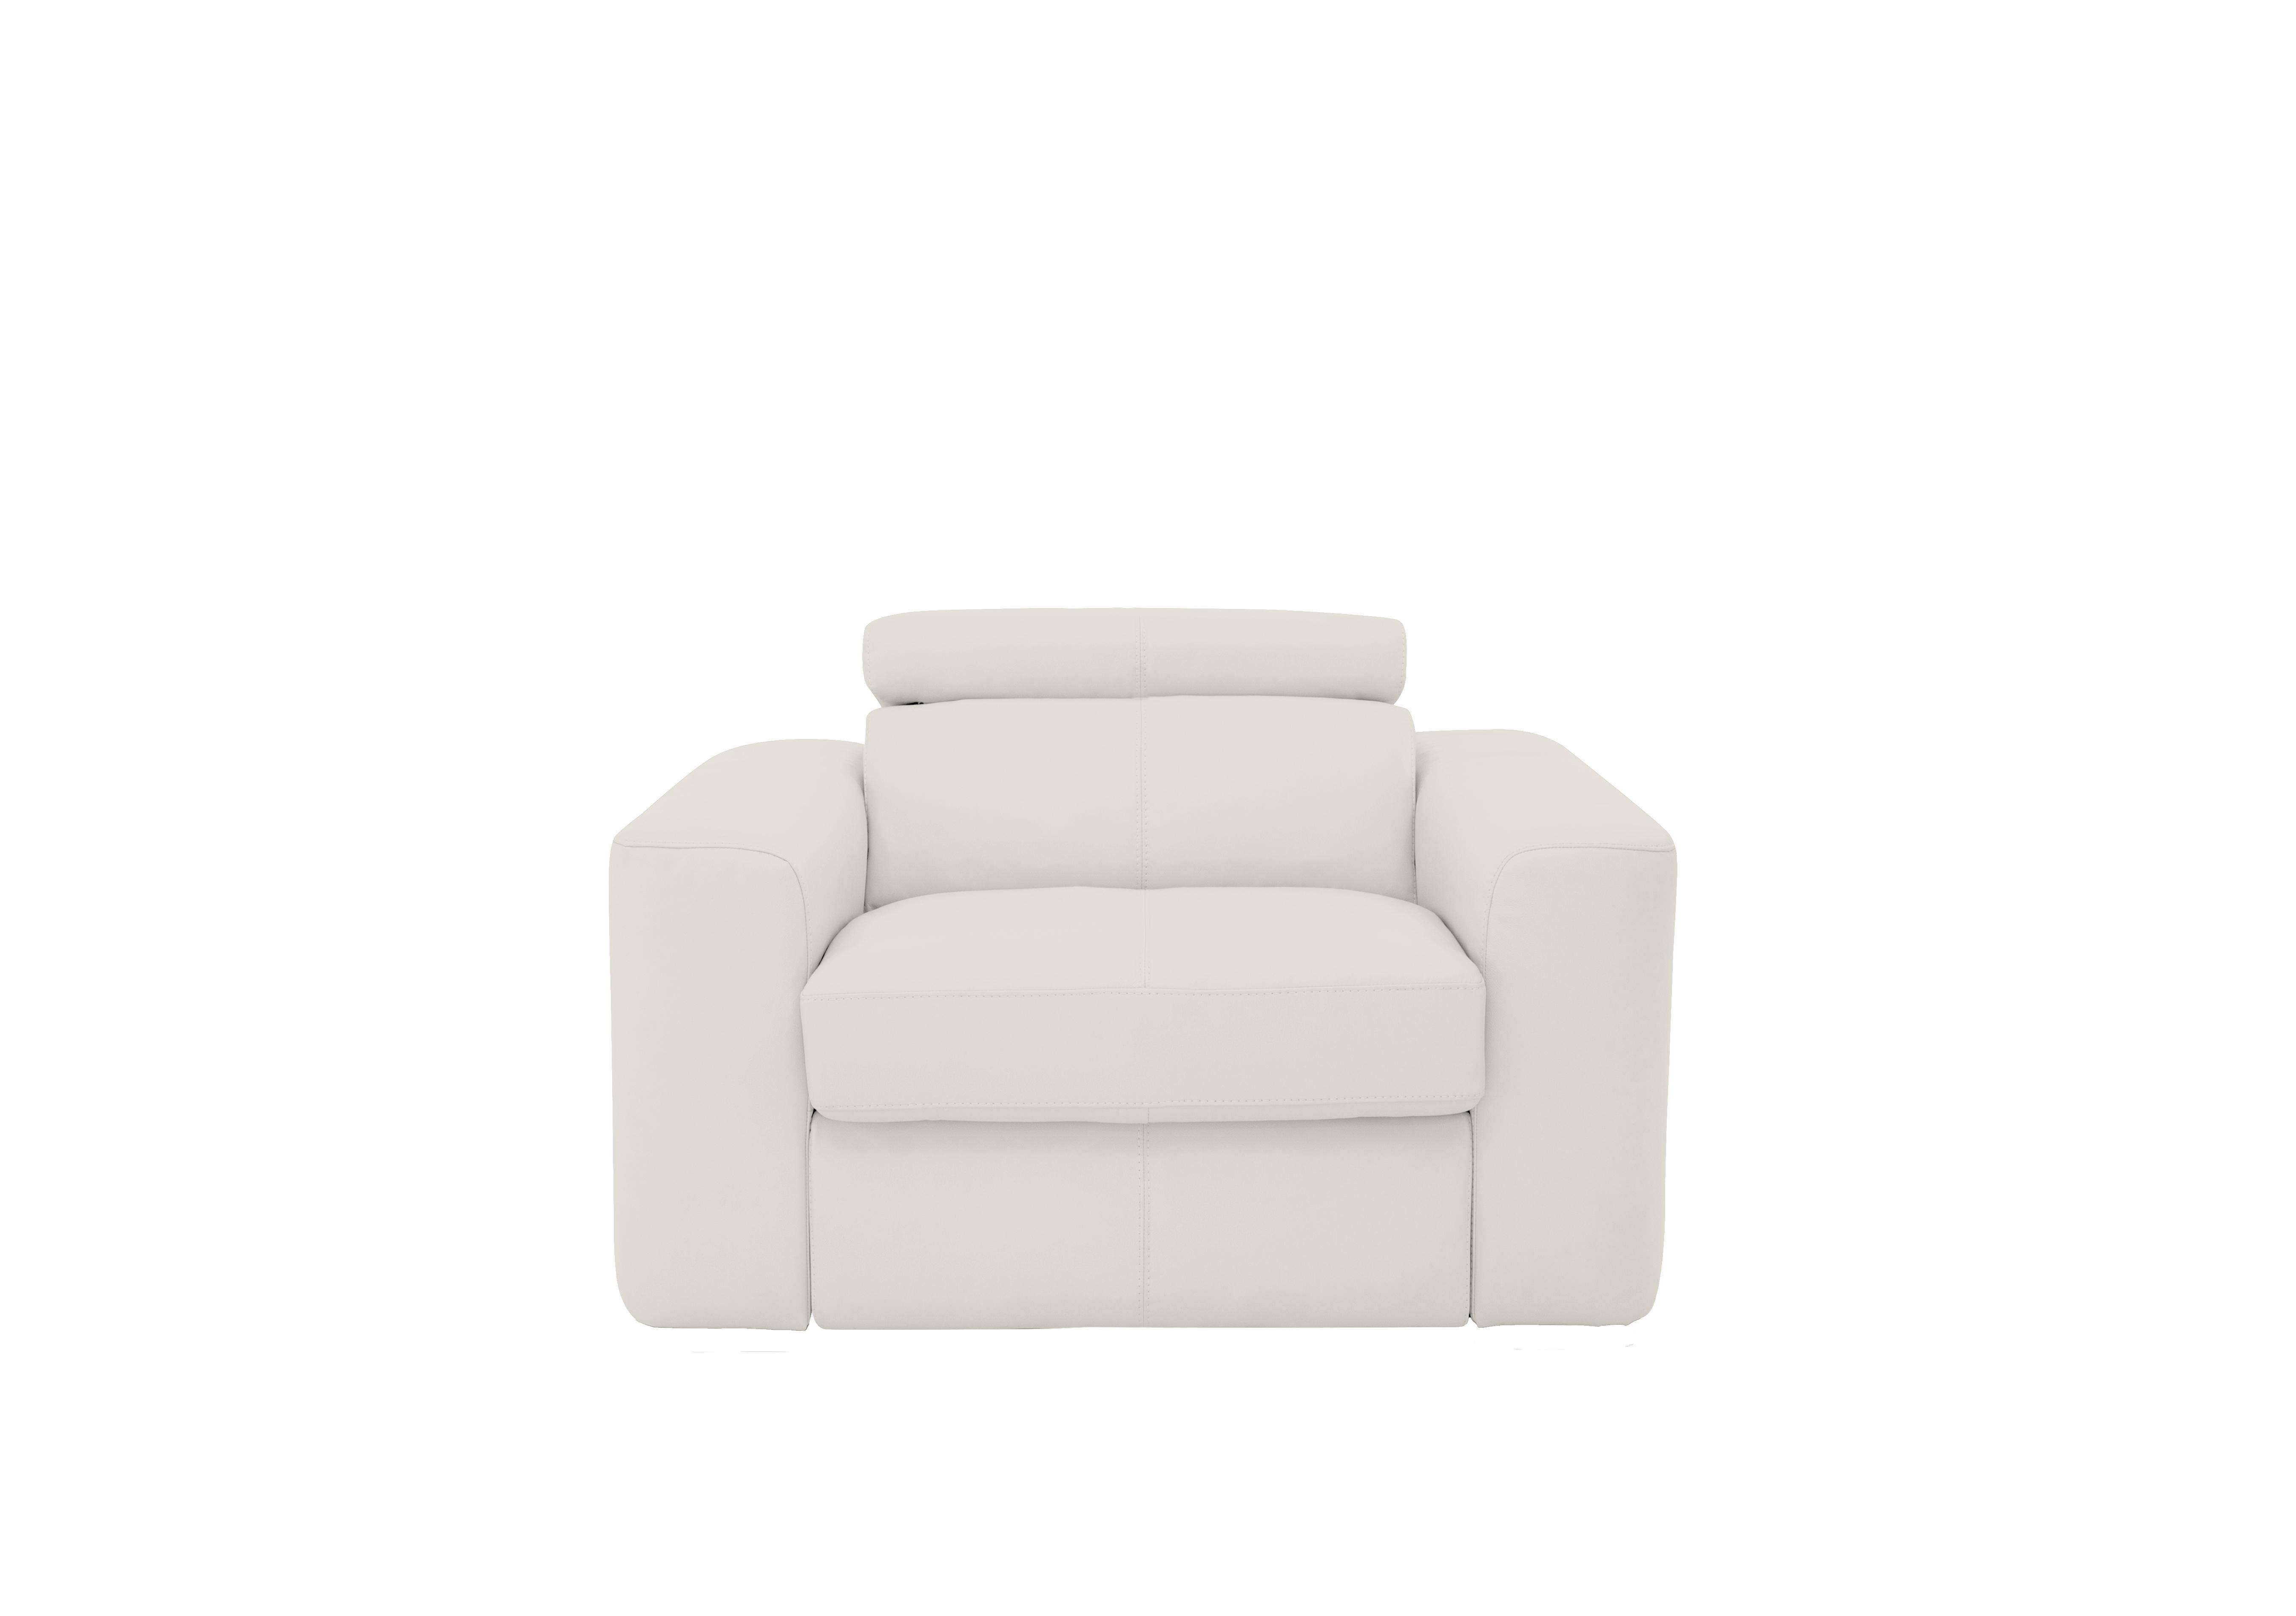 Infinity Leather Armchair in Bv-744d Star White on Furniture Village